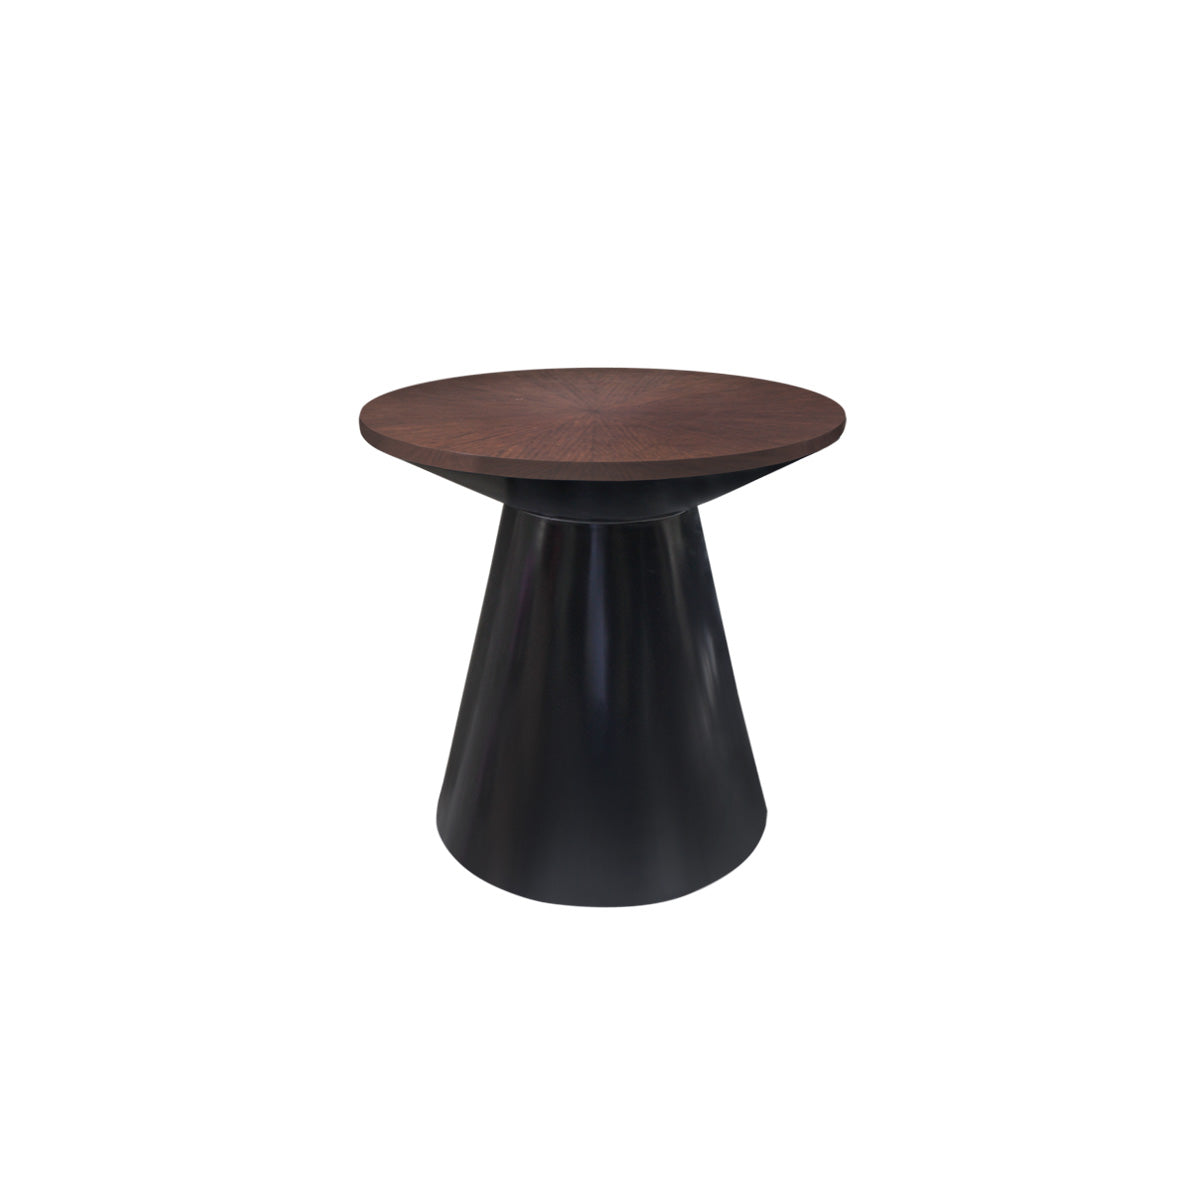 Indonesia online furniture - Contemporary elegant Orion round side table